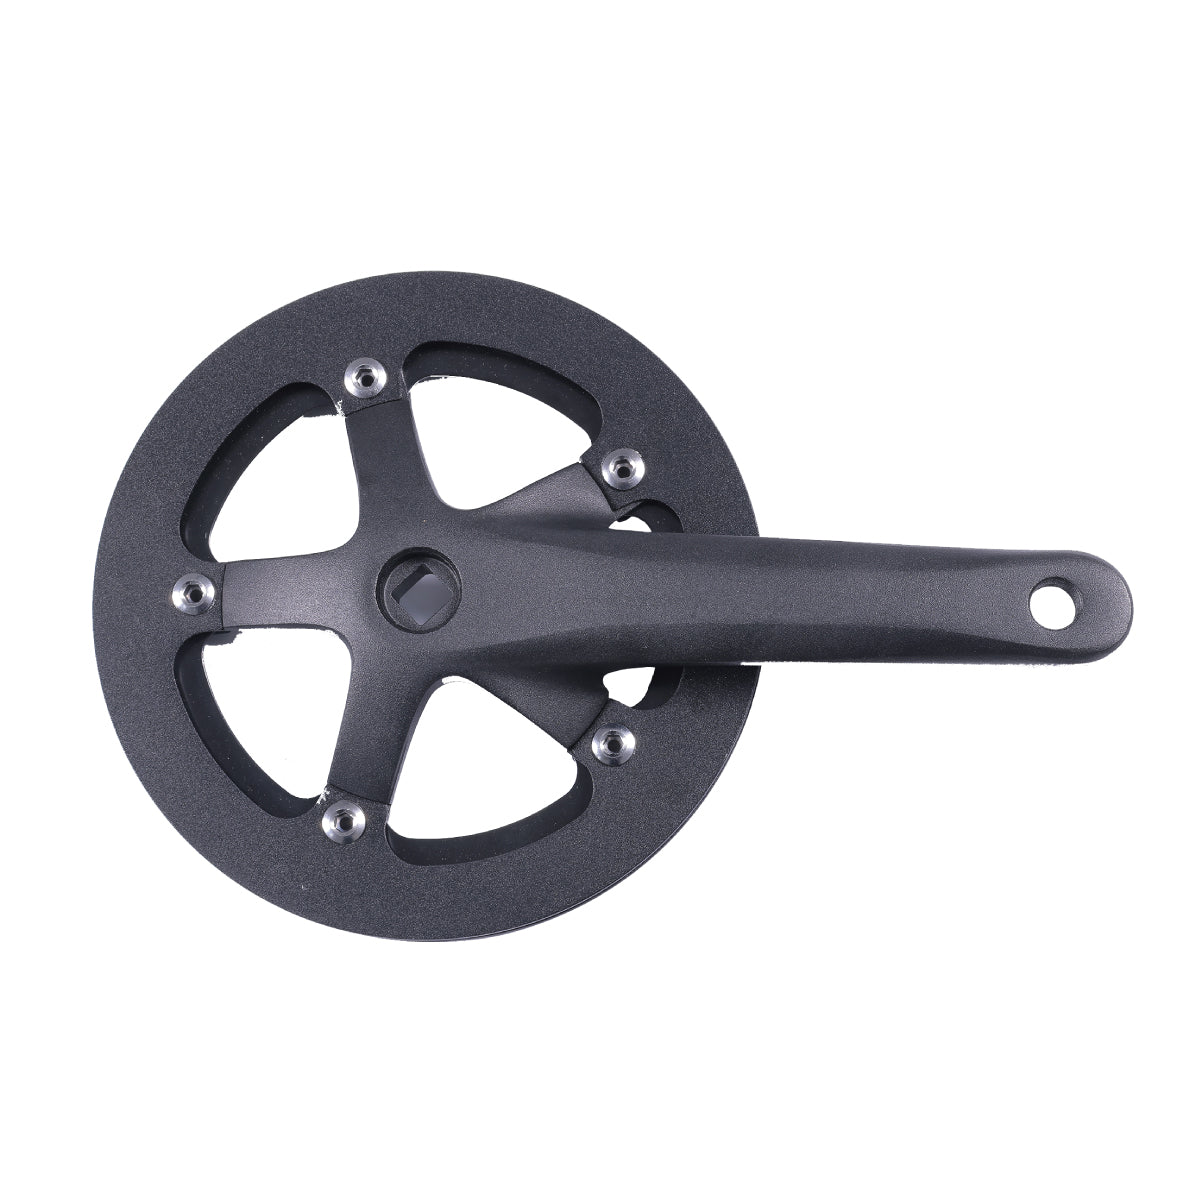 Crank Arm w/Chain Guard and Rind- Drive Side/Right- Denago Commute